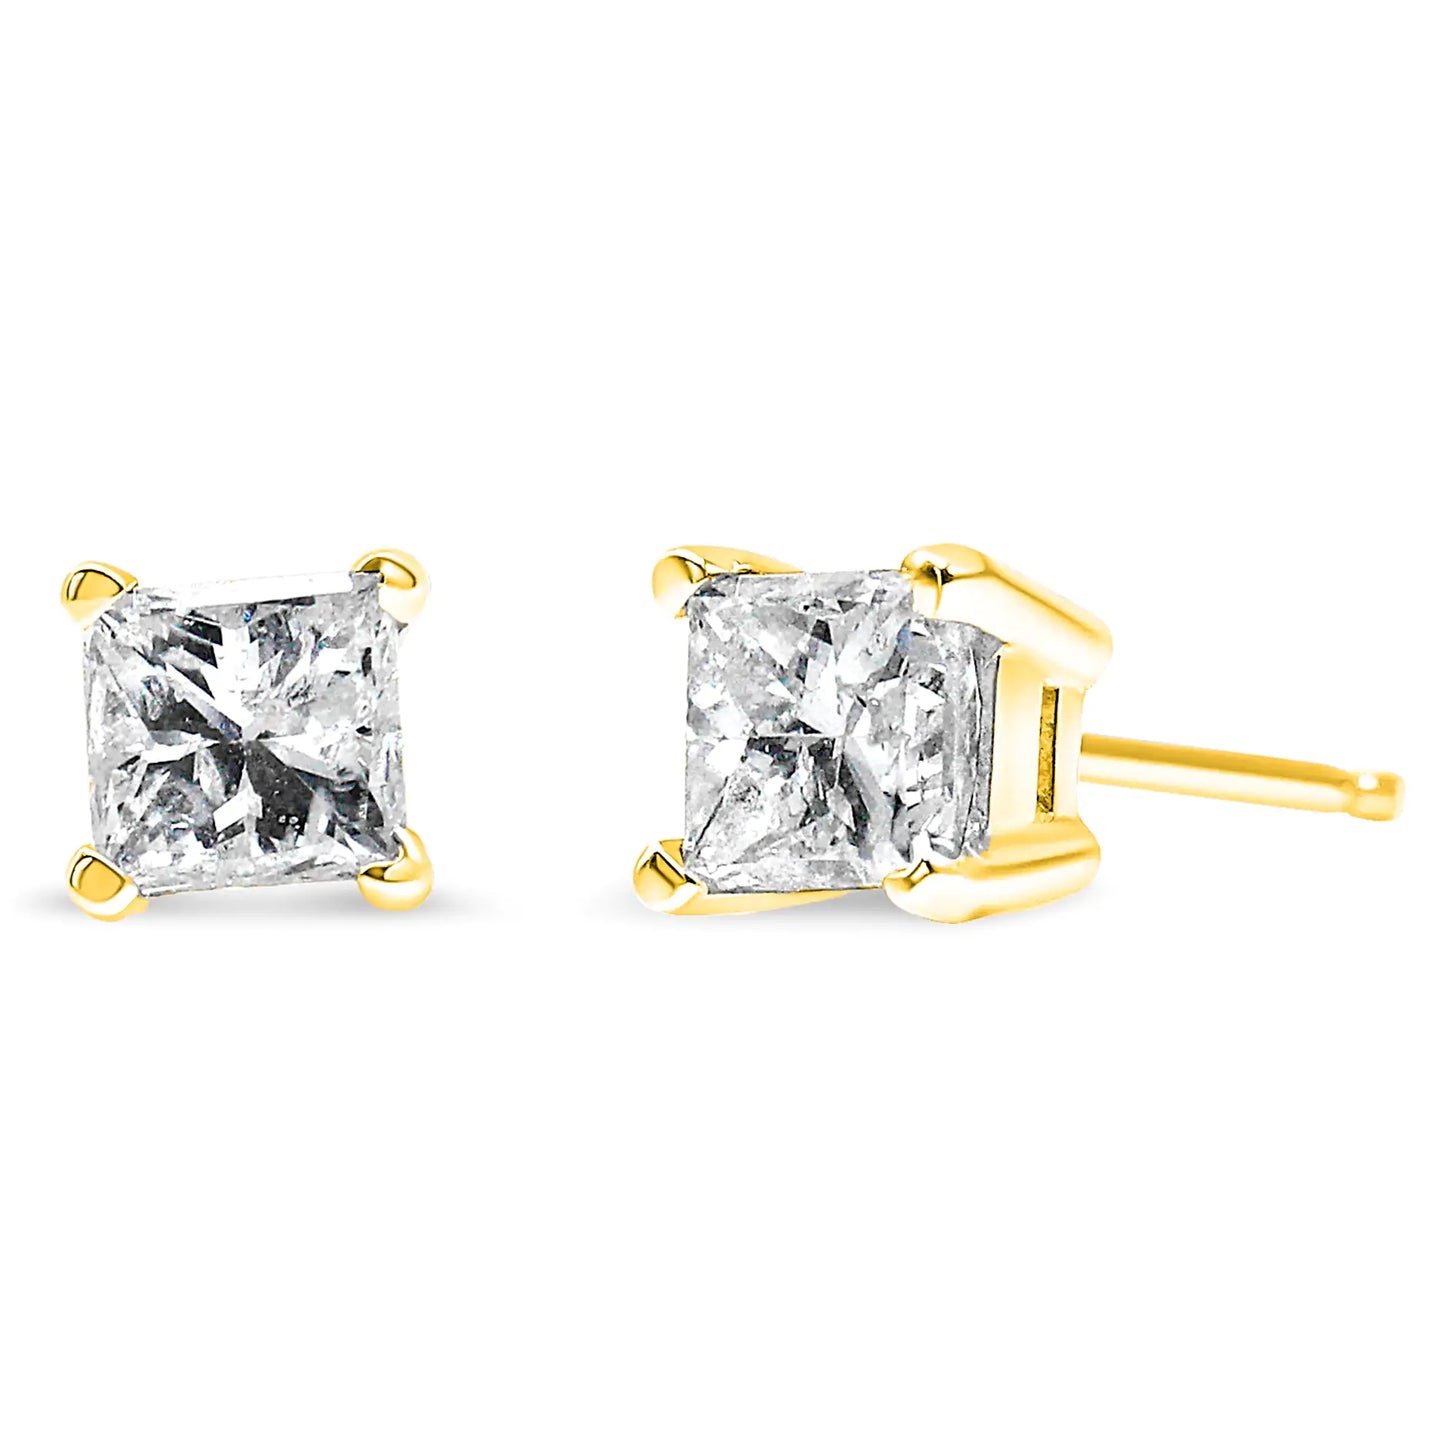 AGS Certified Princess-Cut Square Diamond 4-Prong Solitaire Stud Earrings in 14K Gold (H-I Color, I1-I2 Clarity)